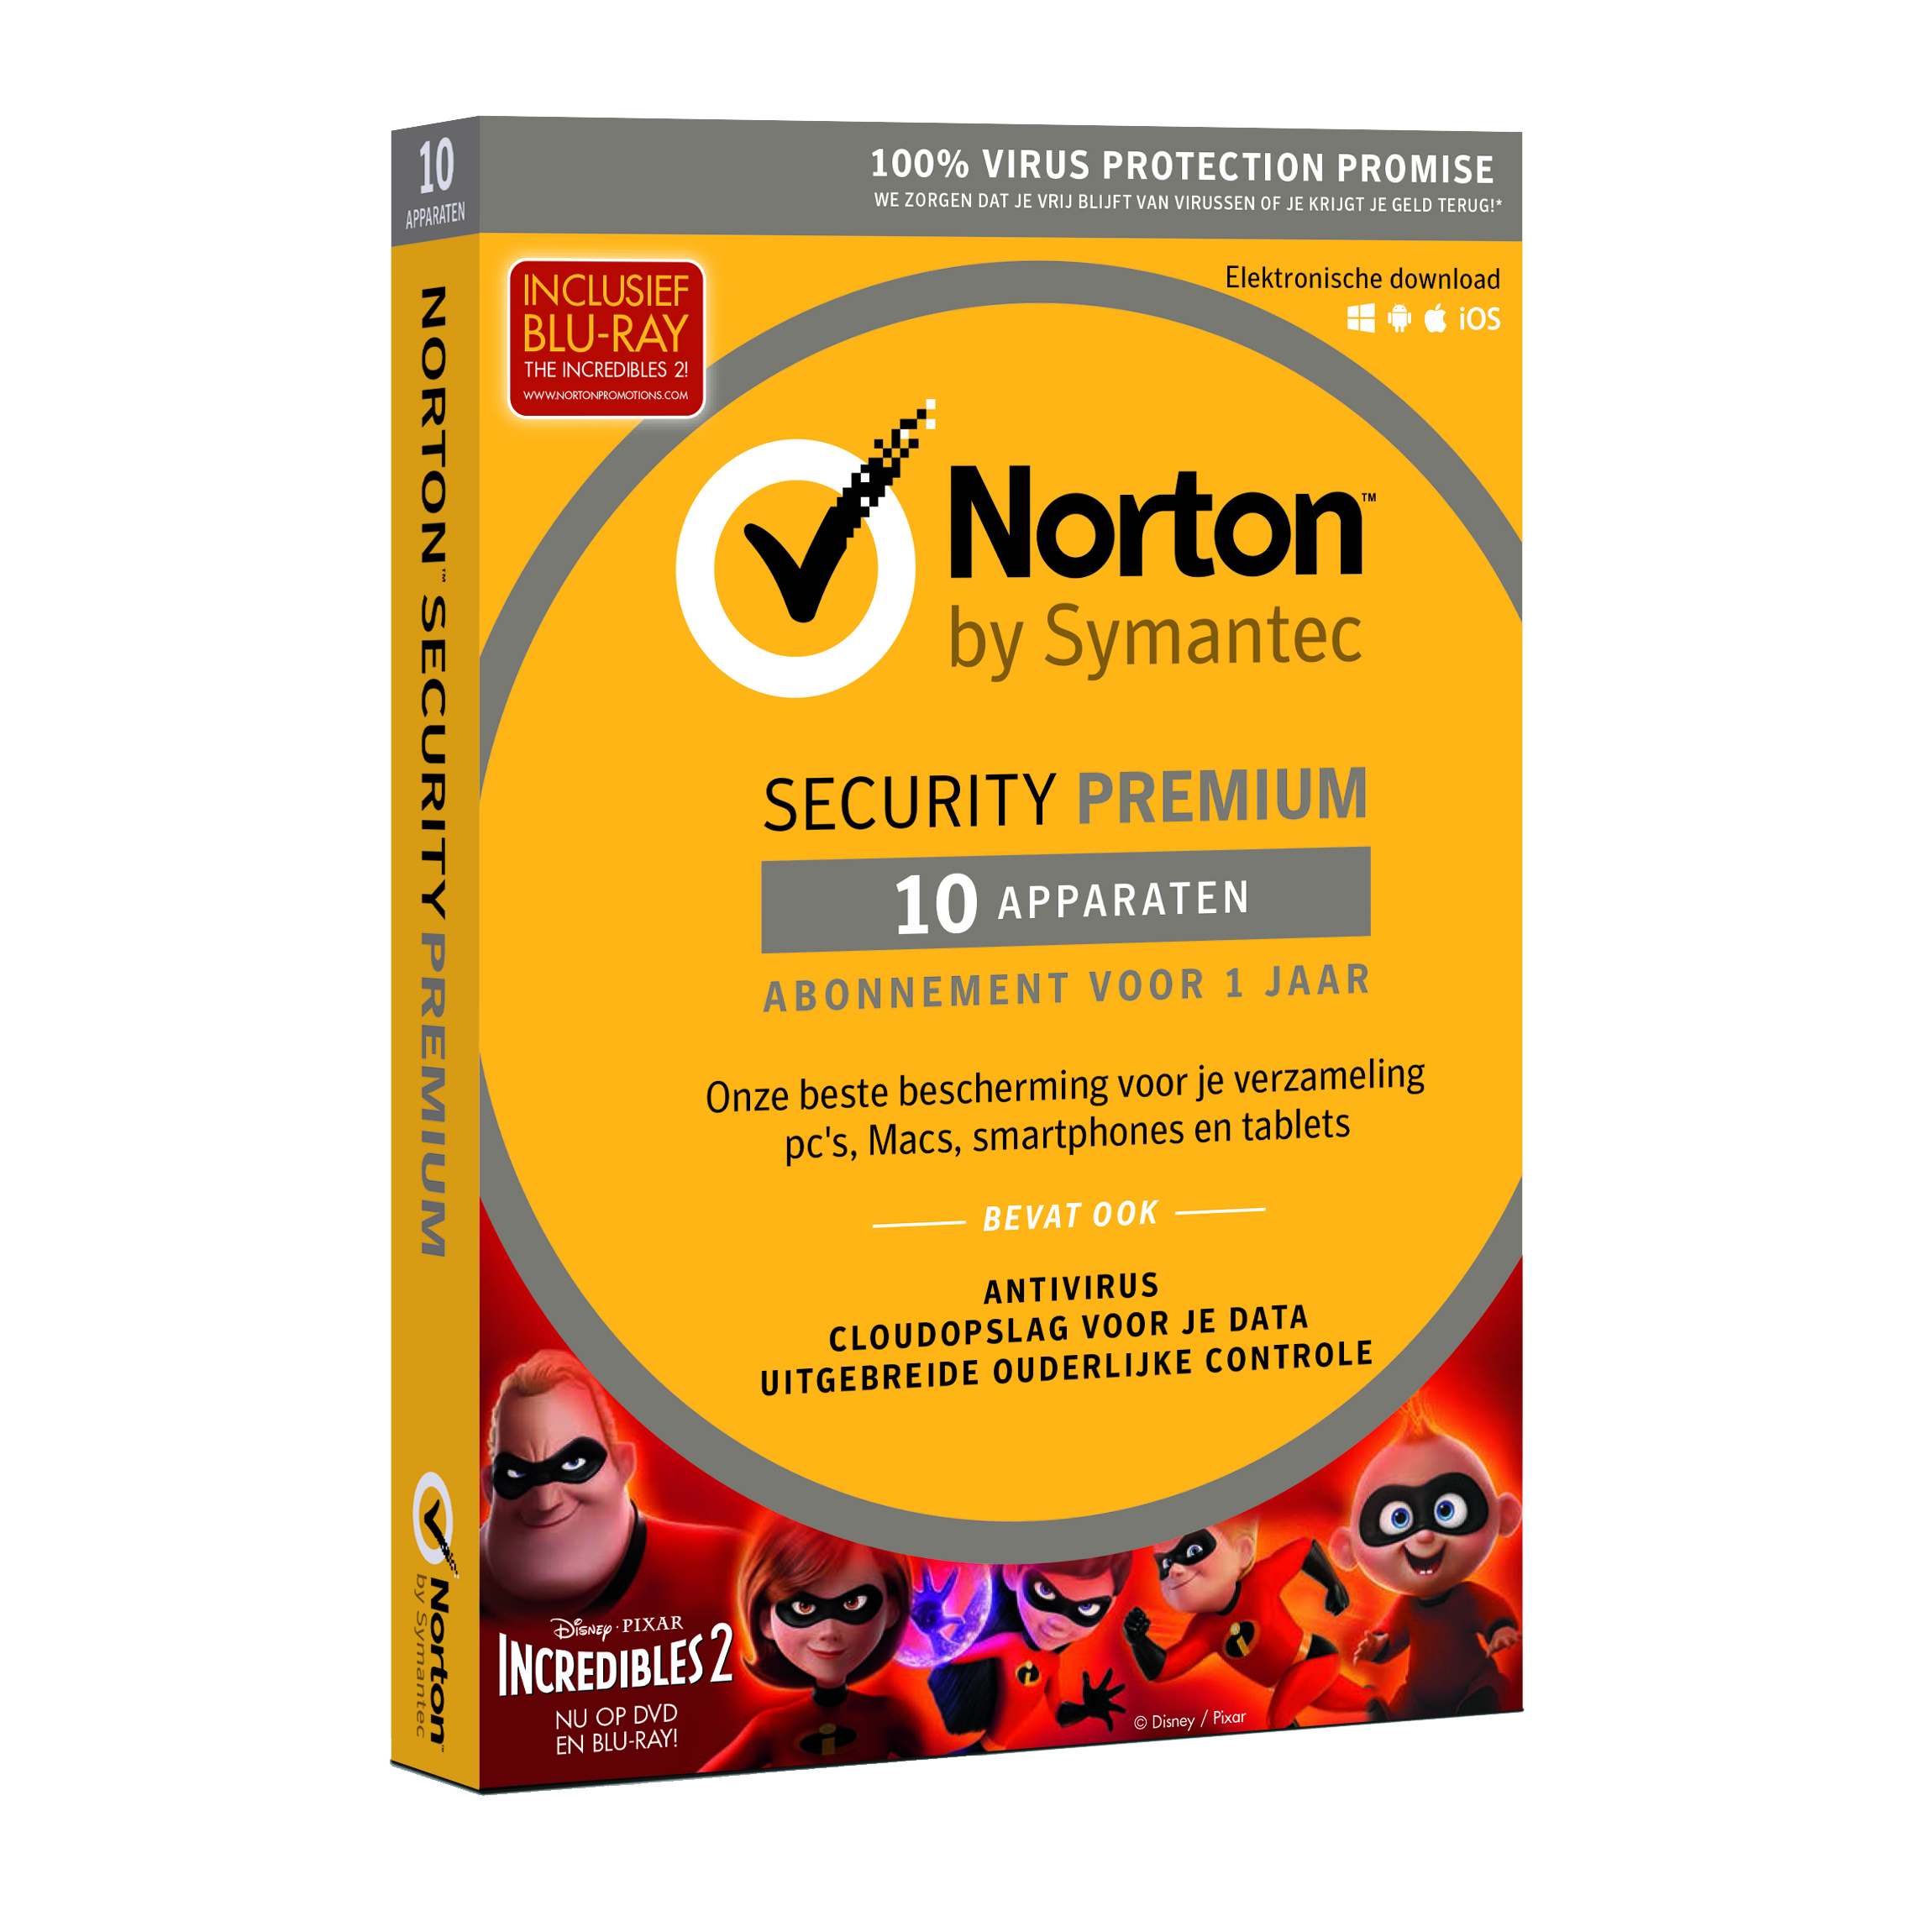 Norton Security Premium 10-Devices 2019. 25GB Online Backup included. Windows, Mac, Android, iOS